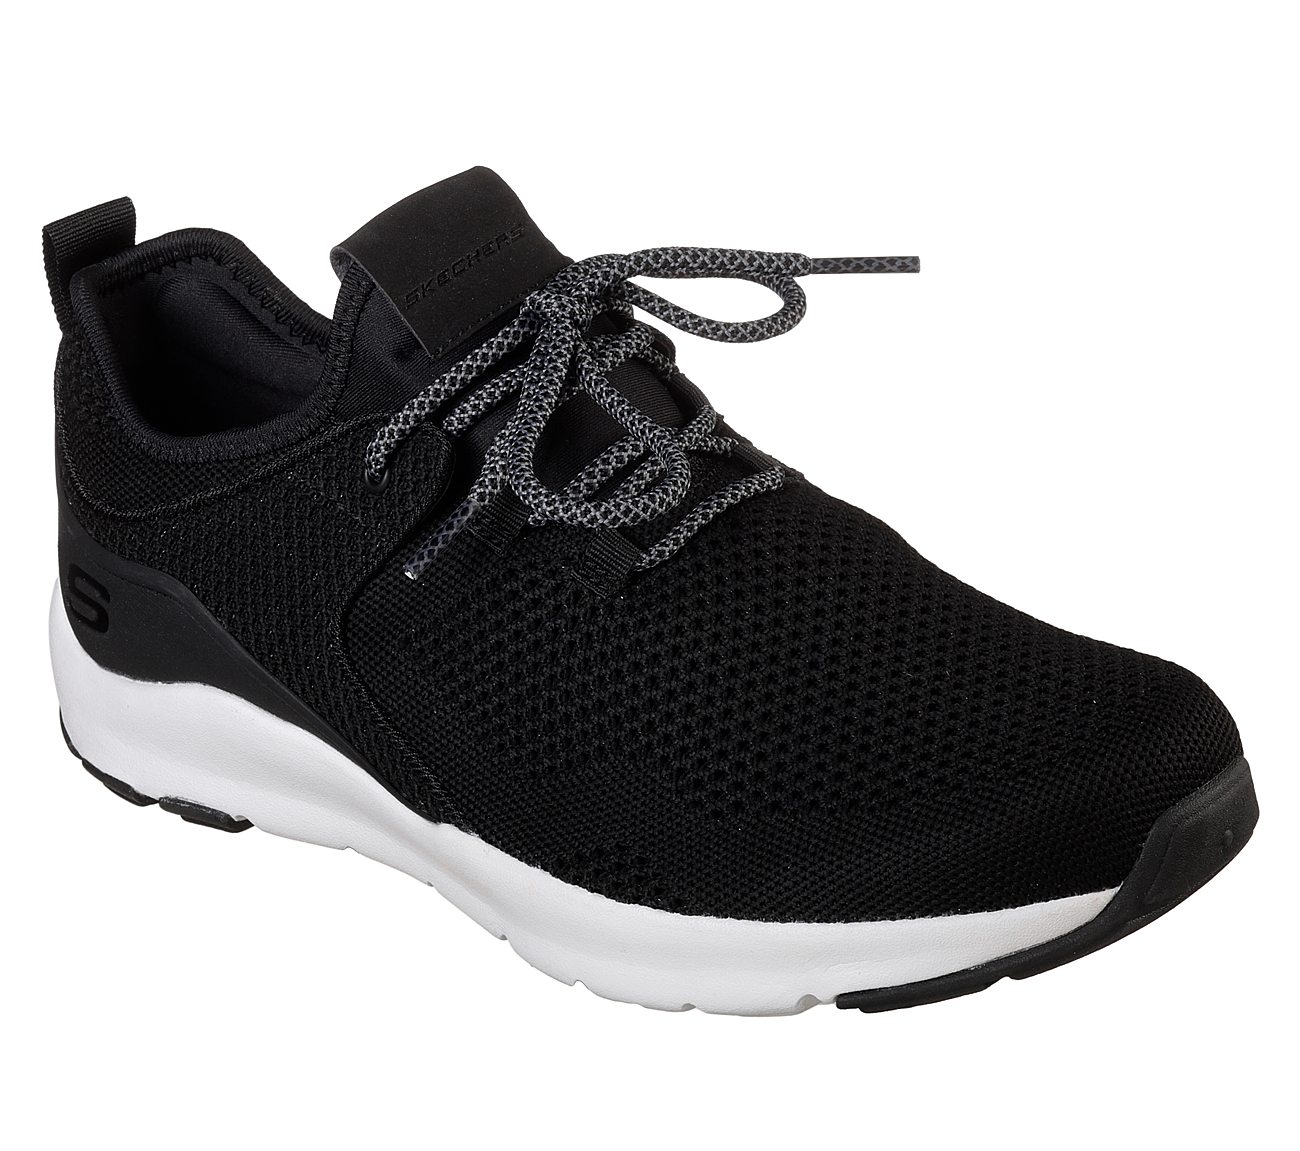 skechers nichlas lishear review off 72 